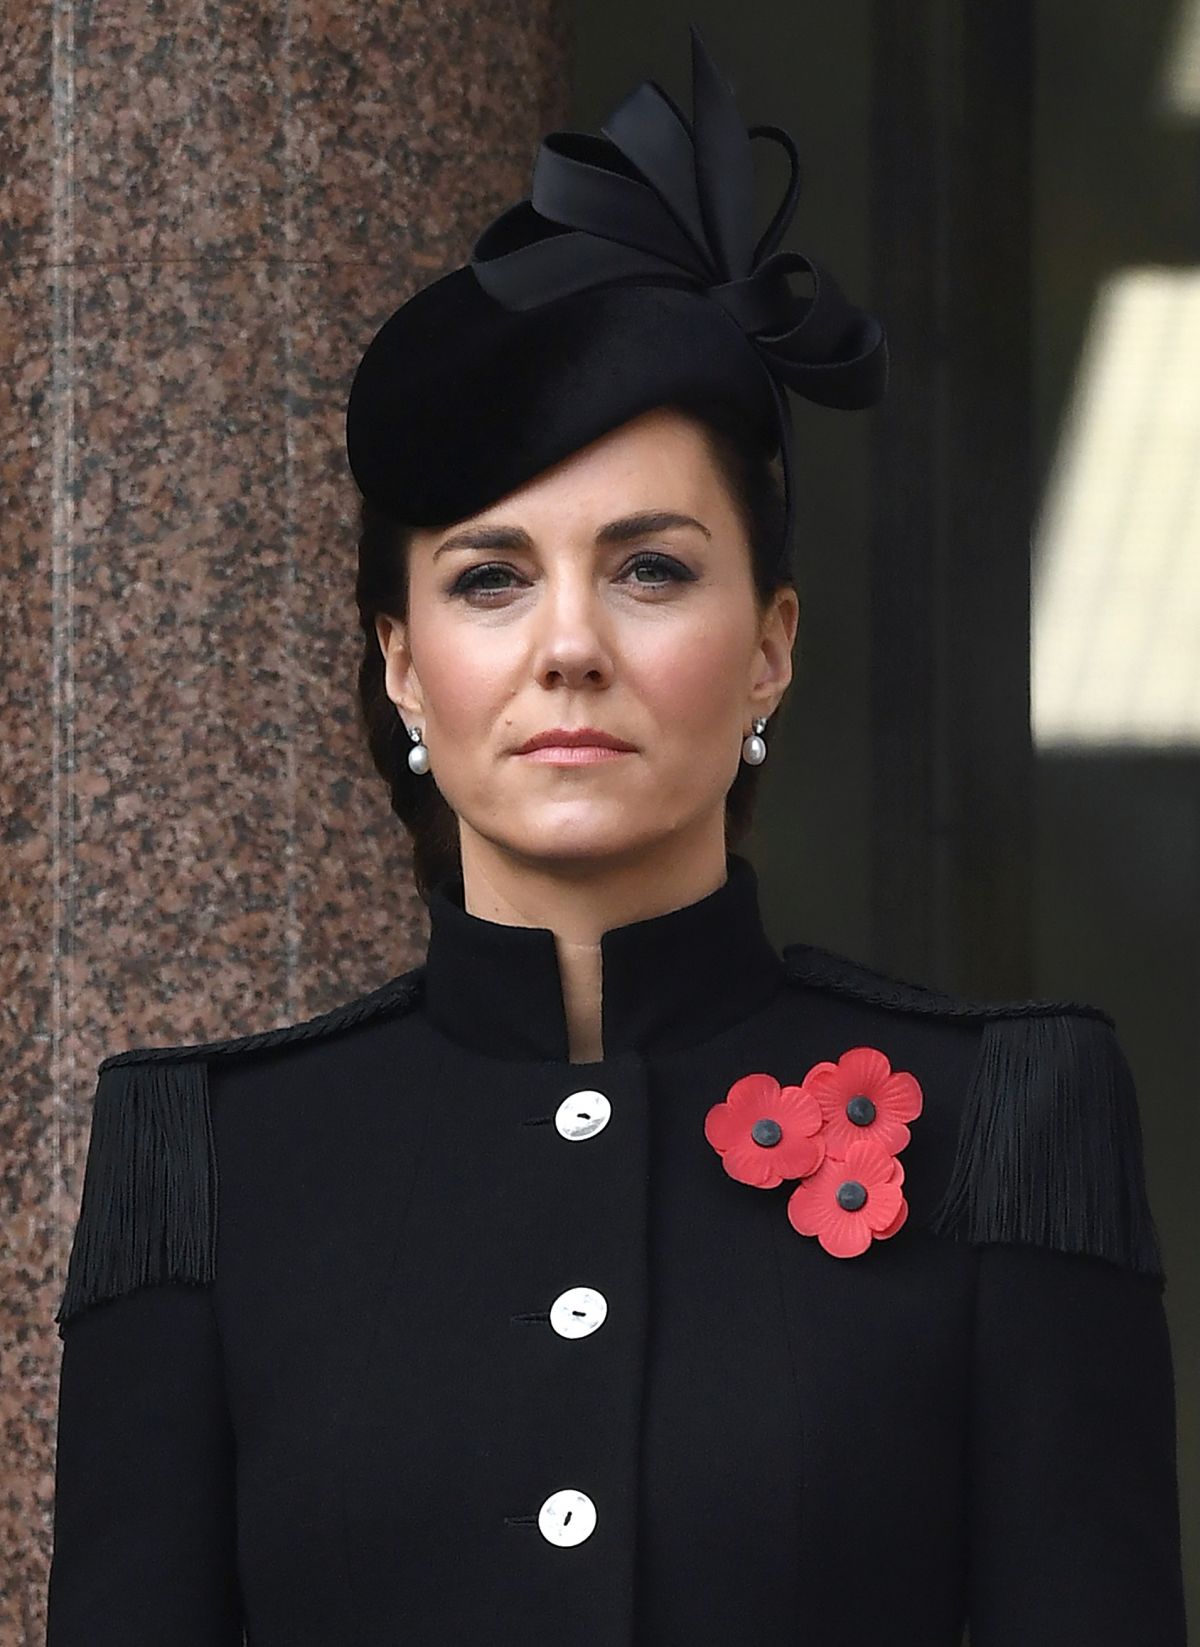 Kate Middleton At Remembrance Sunday Service At Cenotaph In London 11